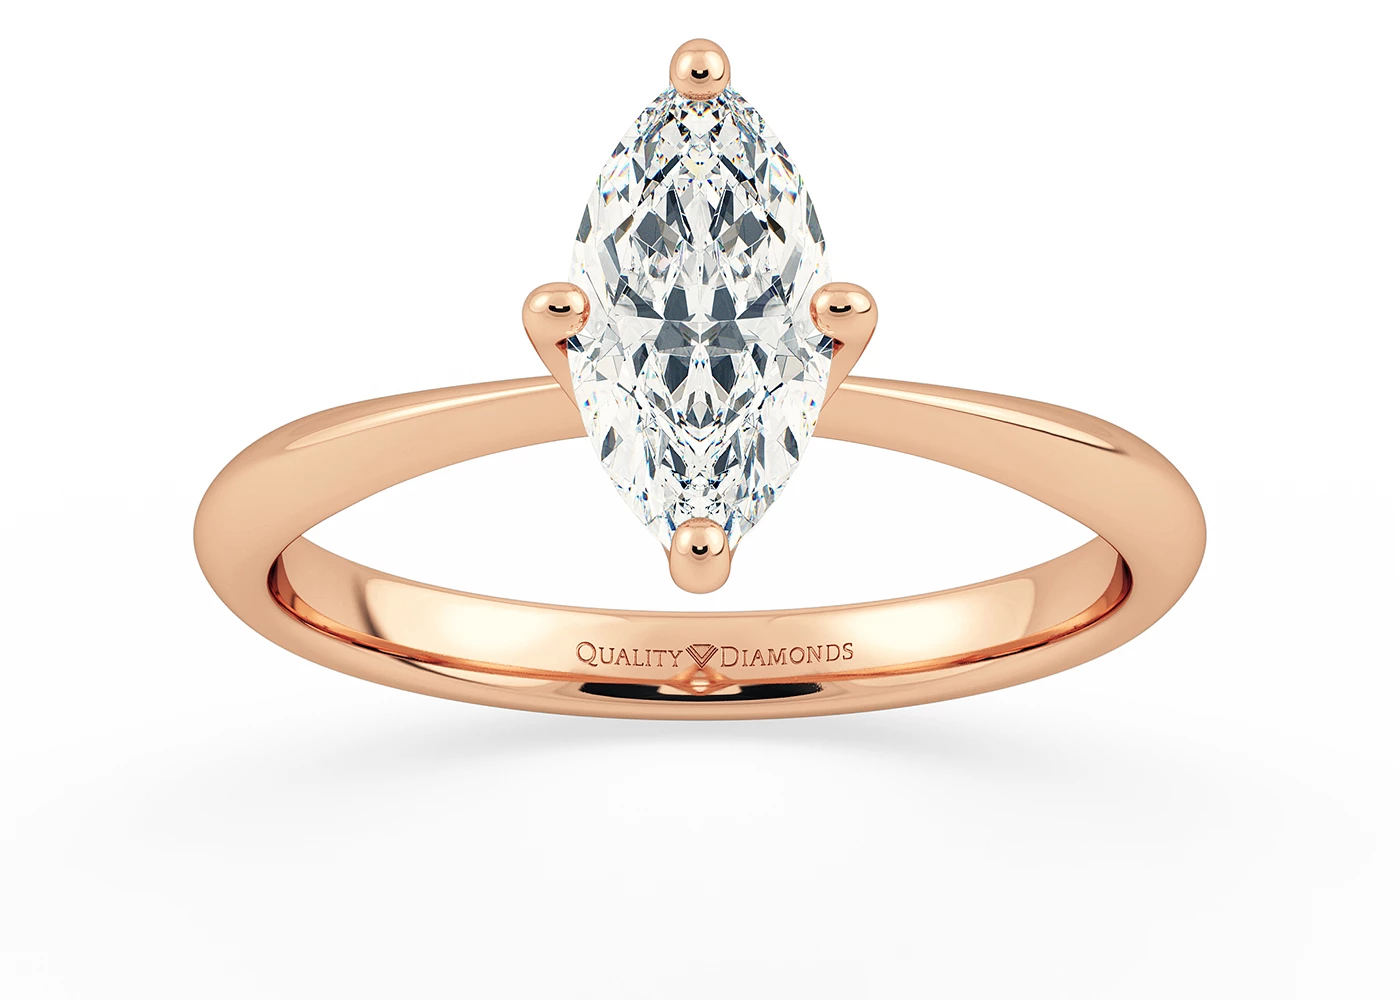 Marquise Amorette Diamond Ring in 9K Rose Gold